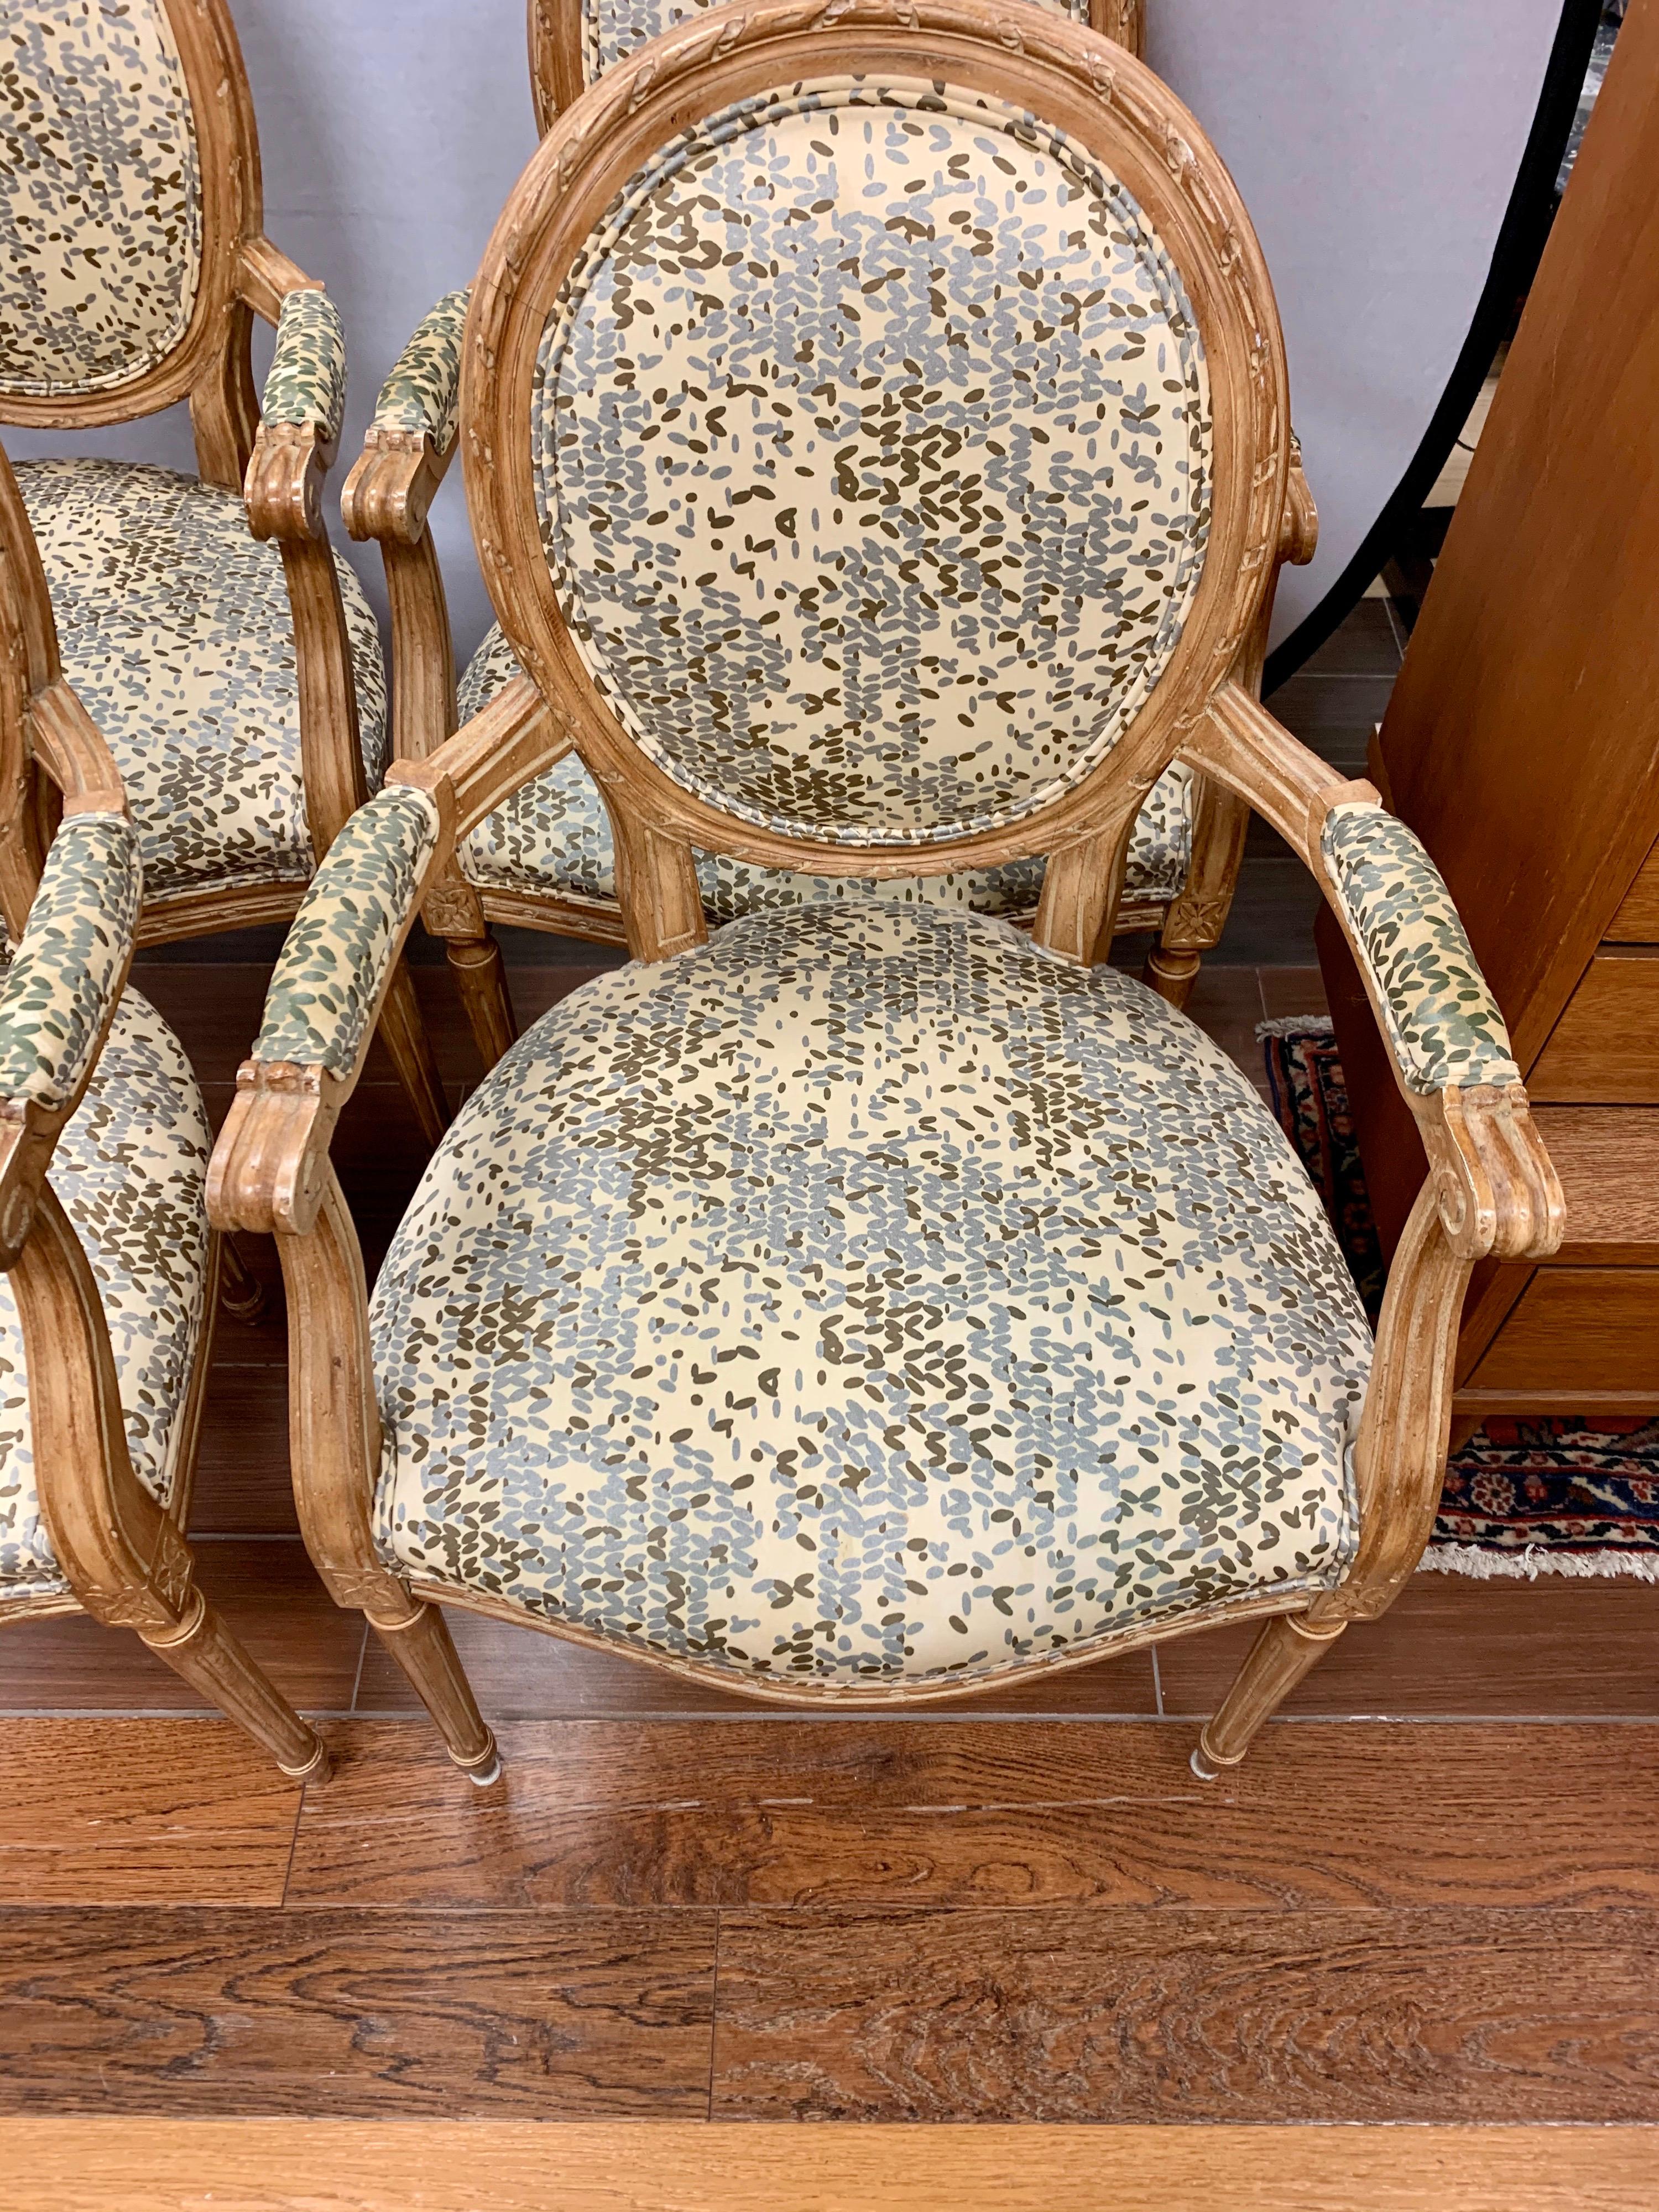 Pair of French Louis XVI Carved Oval Back Fruitwood Armchairs Kravet Fabric 1